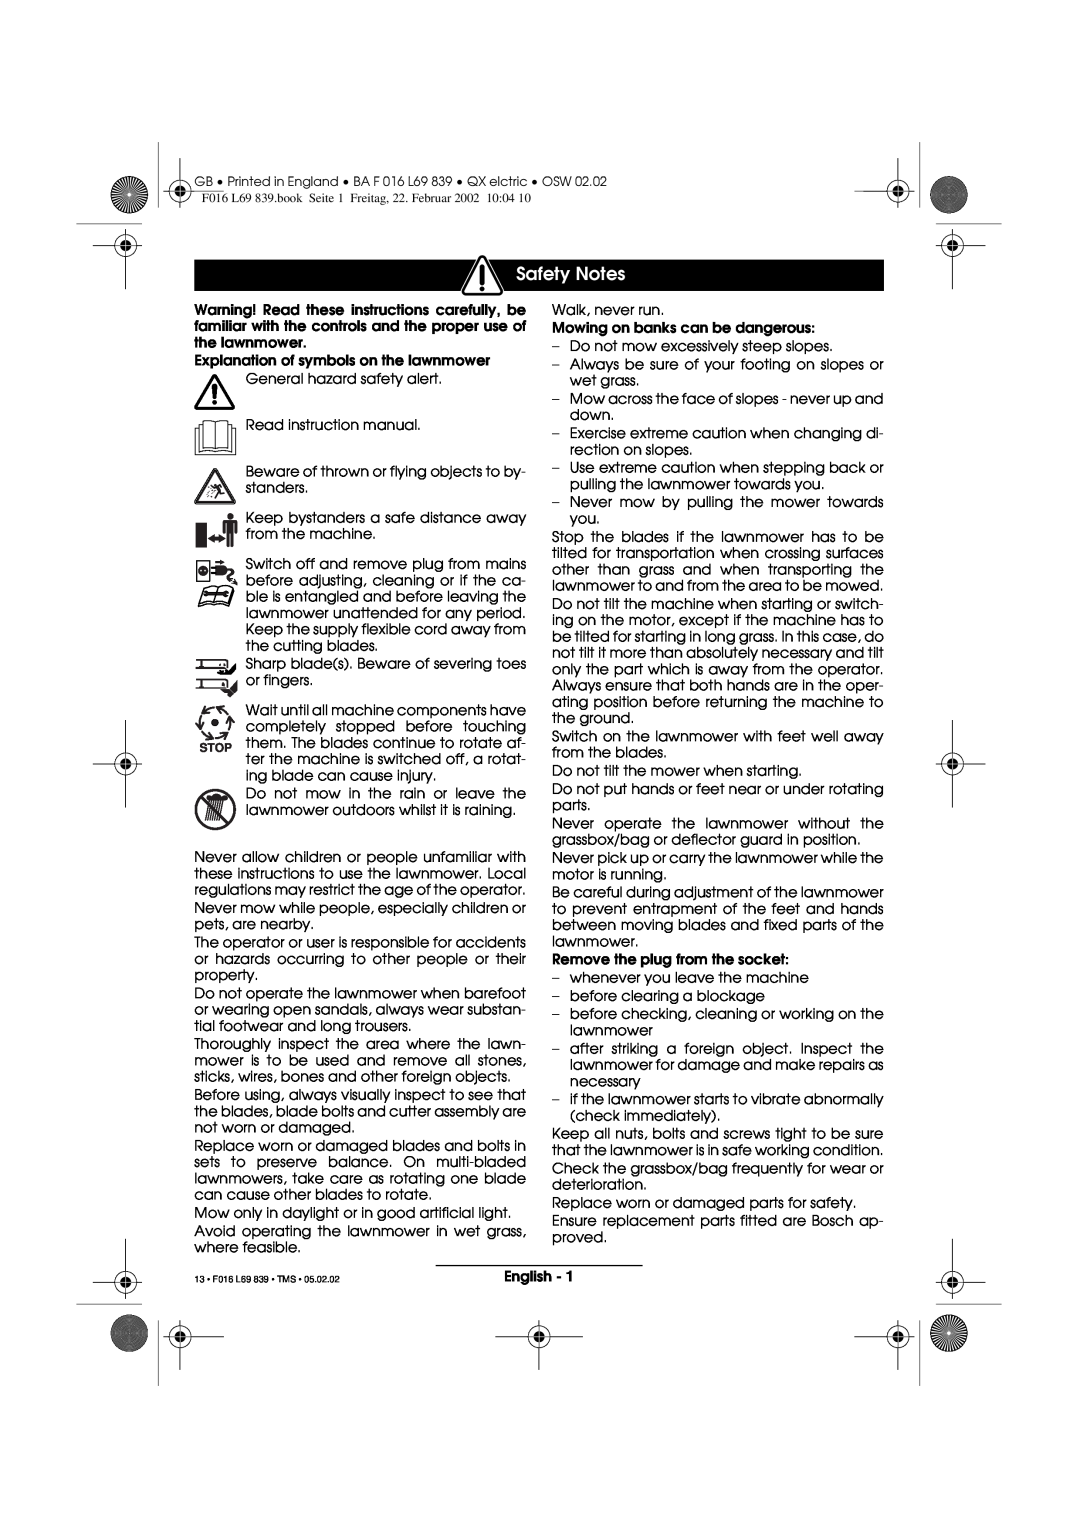 Atco QX operating instructions Safety Notes 